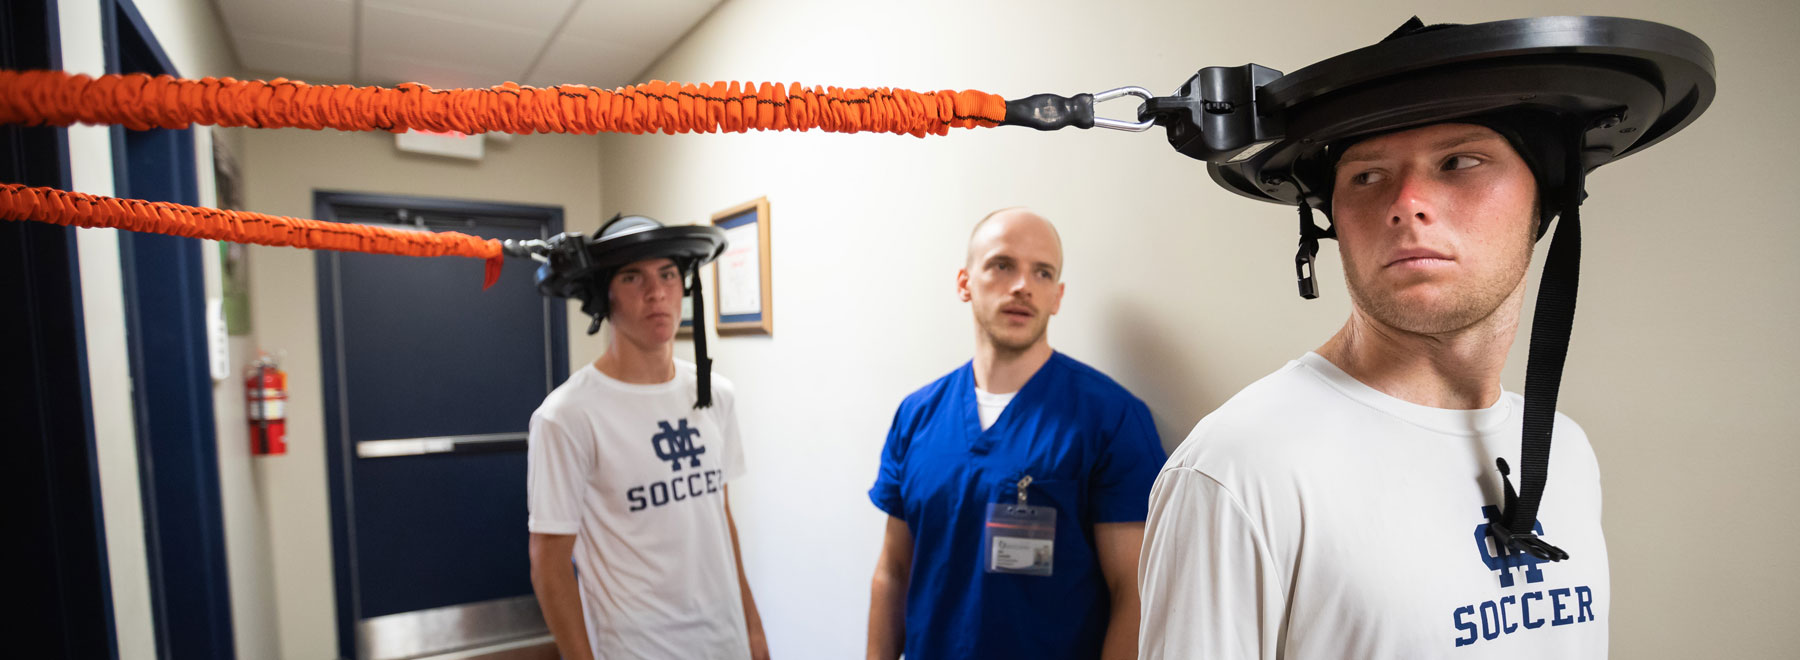 Physical therapy resident Tyler Luchtefeld, center, monitors motor skills and movement testing on soccer players Carlos Hernandez-Vicente, left, and Connor Johnson.